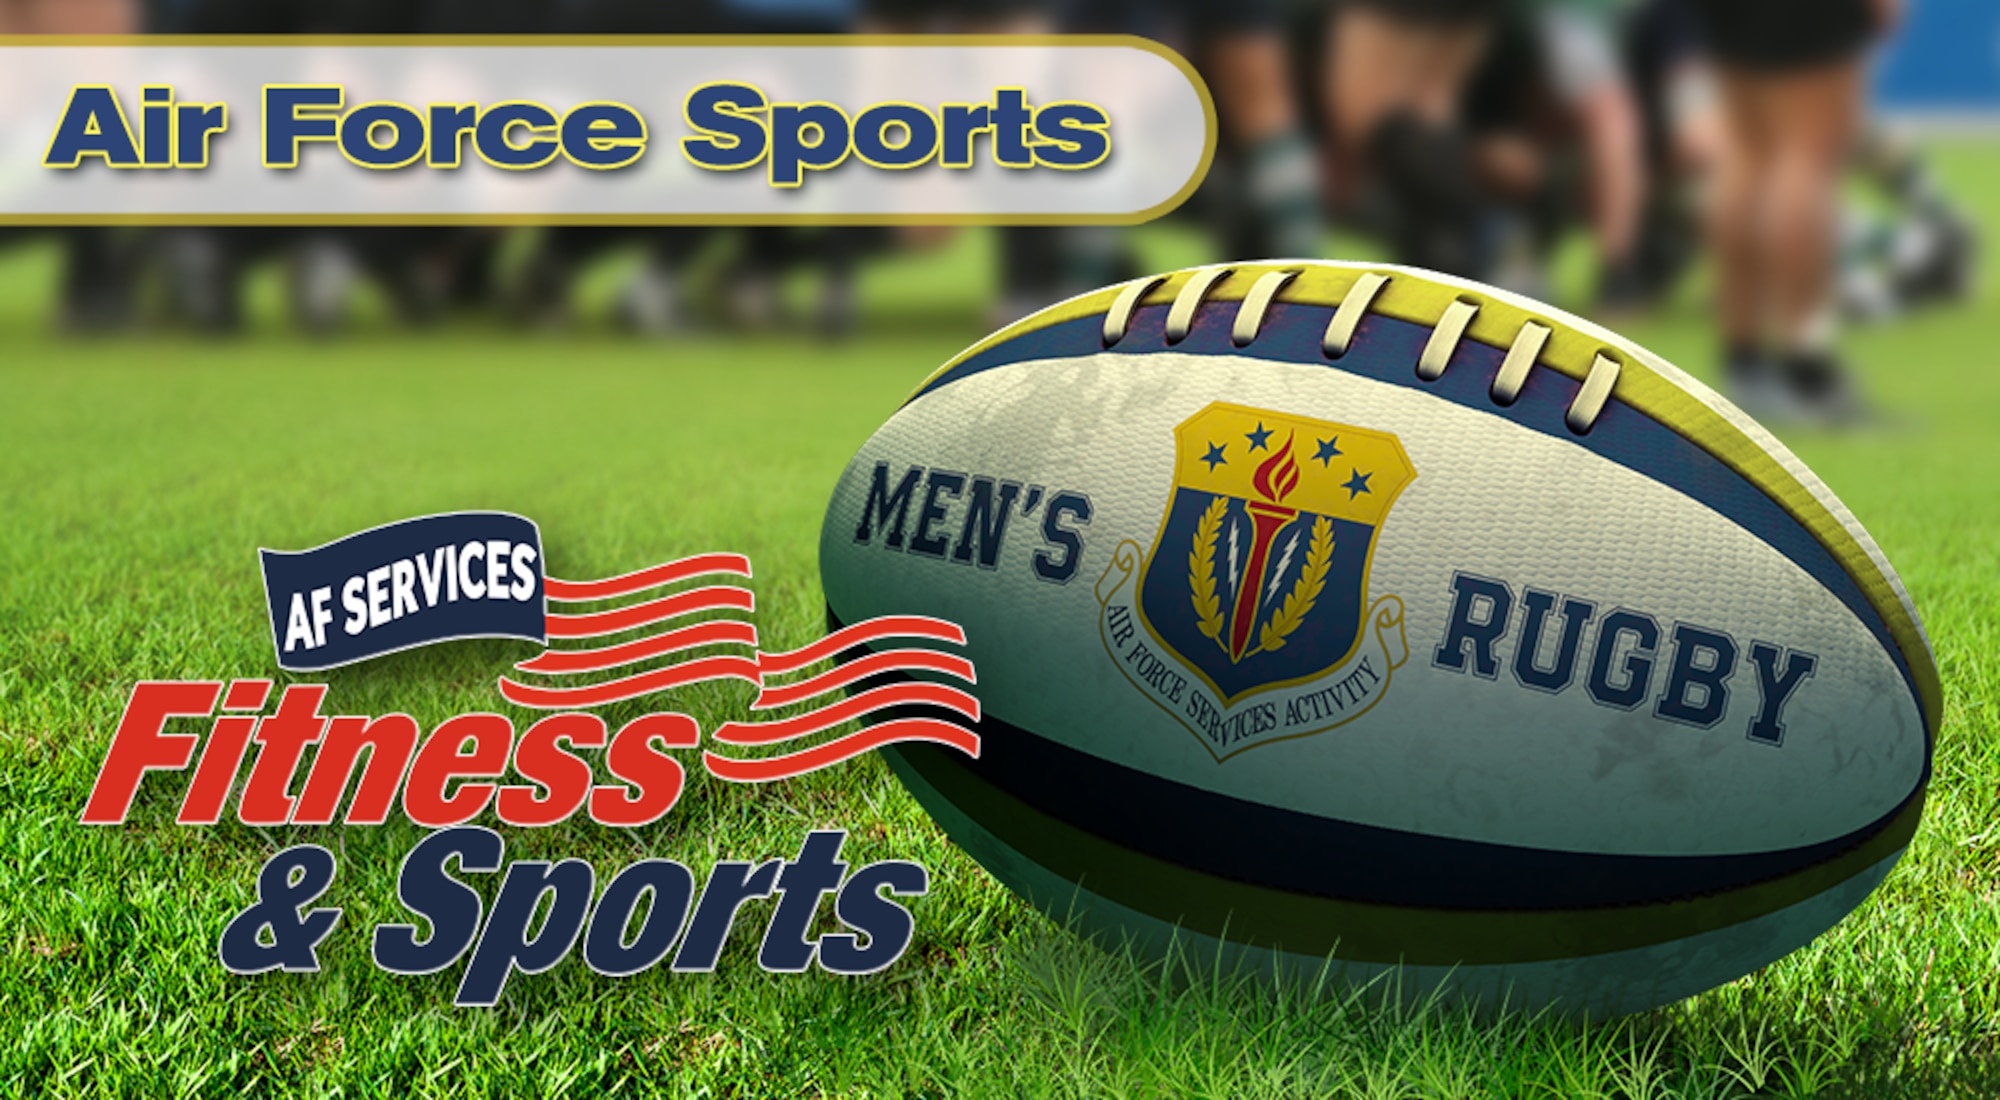 Air Force Sports Rugby graphic (By Greg Hand)